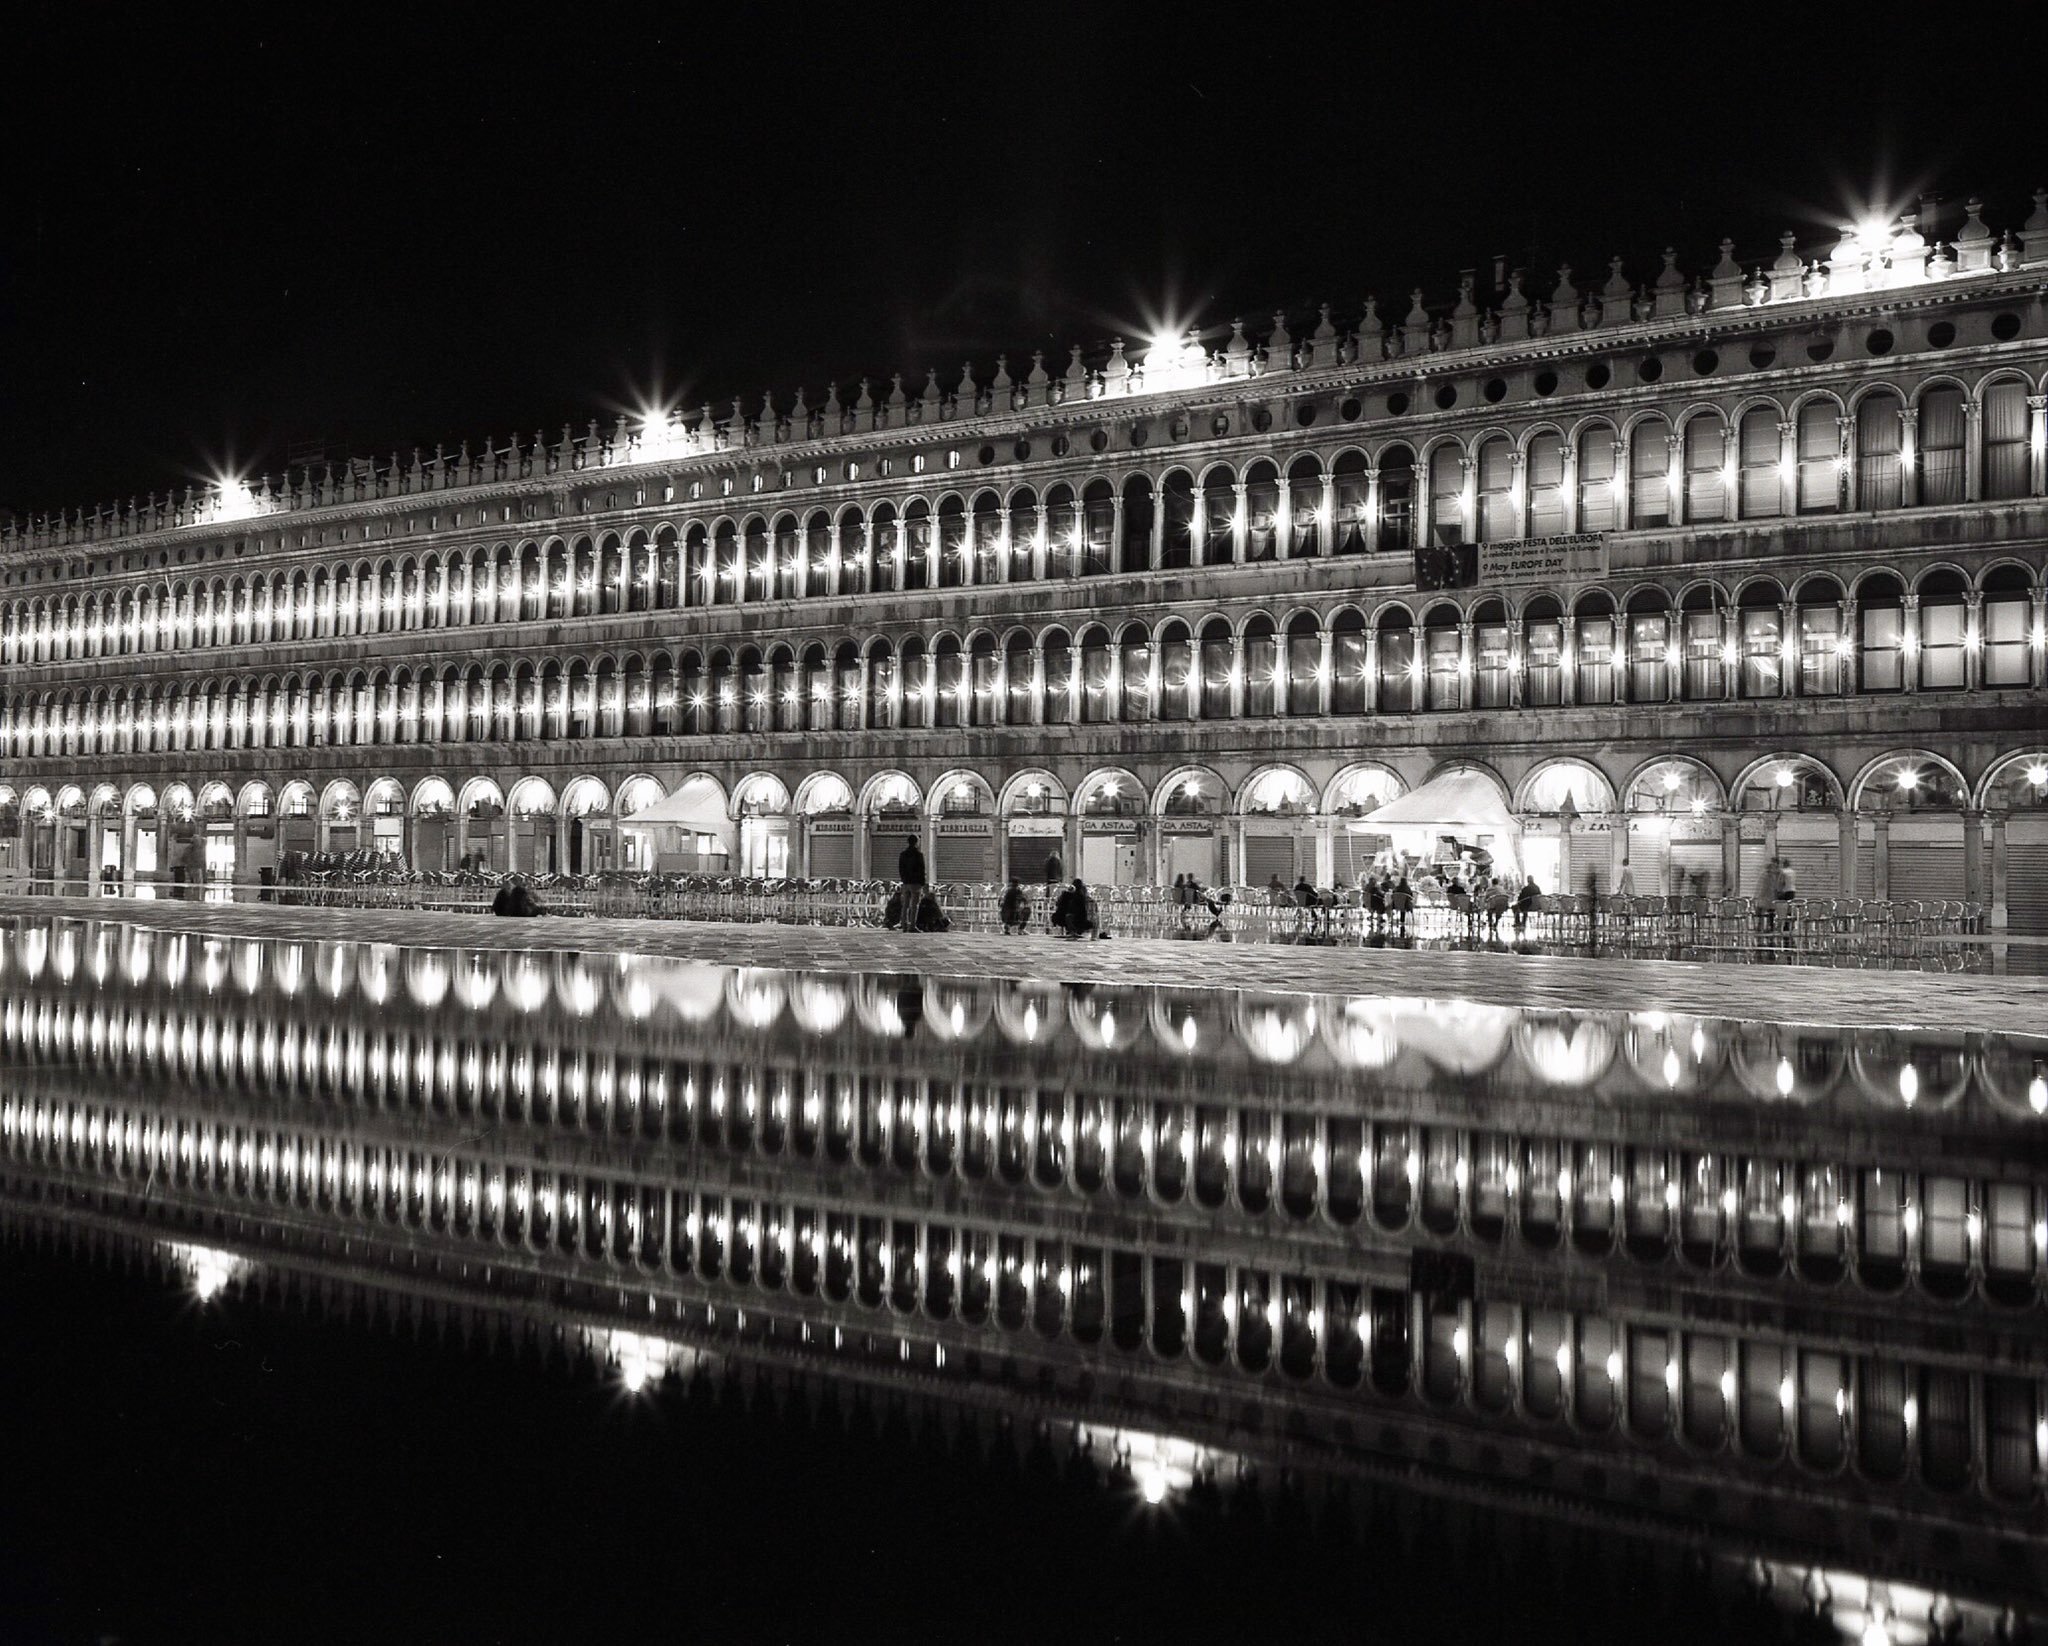 @aisbaby · 3h It’s #ilfordphoto #fridayfavourites and with the theme, I want to say my heart goes out to Venice ? I had the pleasure of spending 5 glorious nights in the city, and her magic really sparkles at night. Taken with  @ILFORDPhoto  Delta 400, Mamiya 7ii at 12:30am.